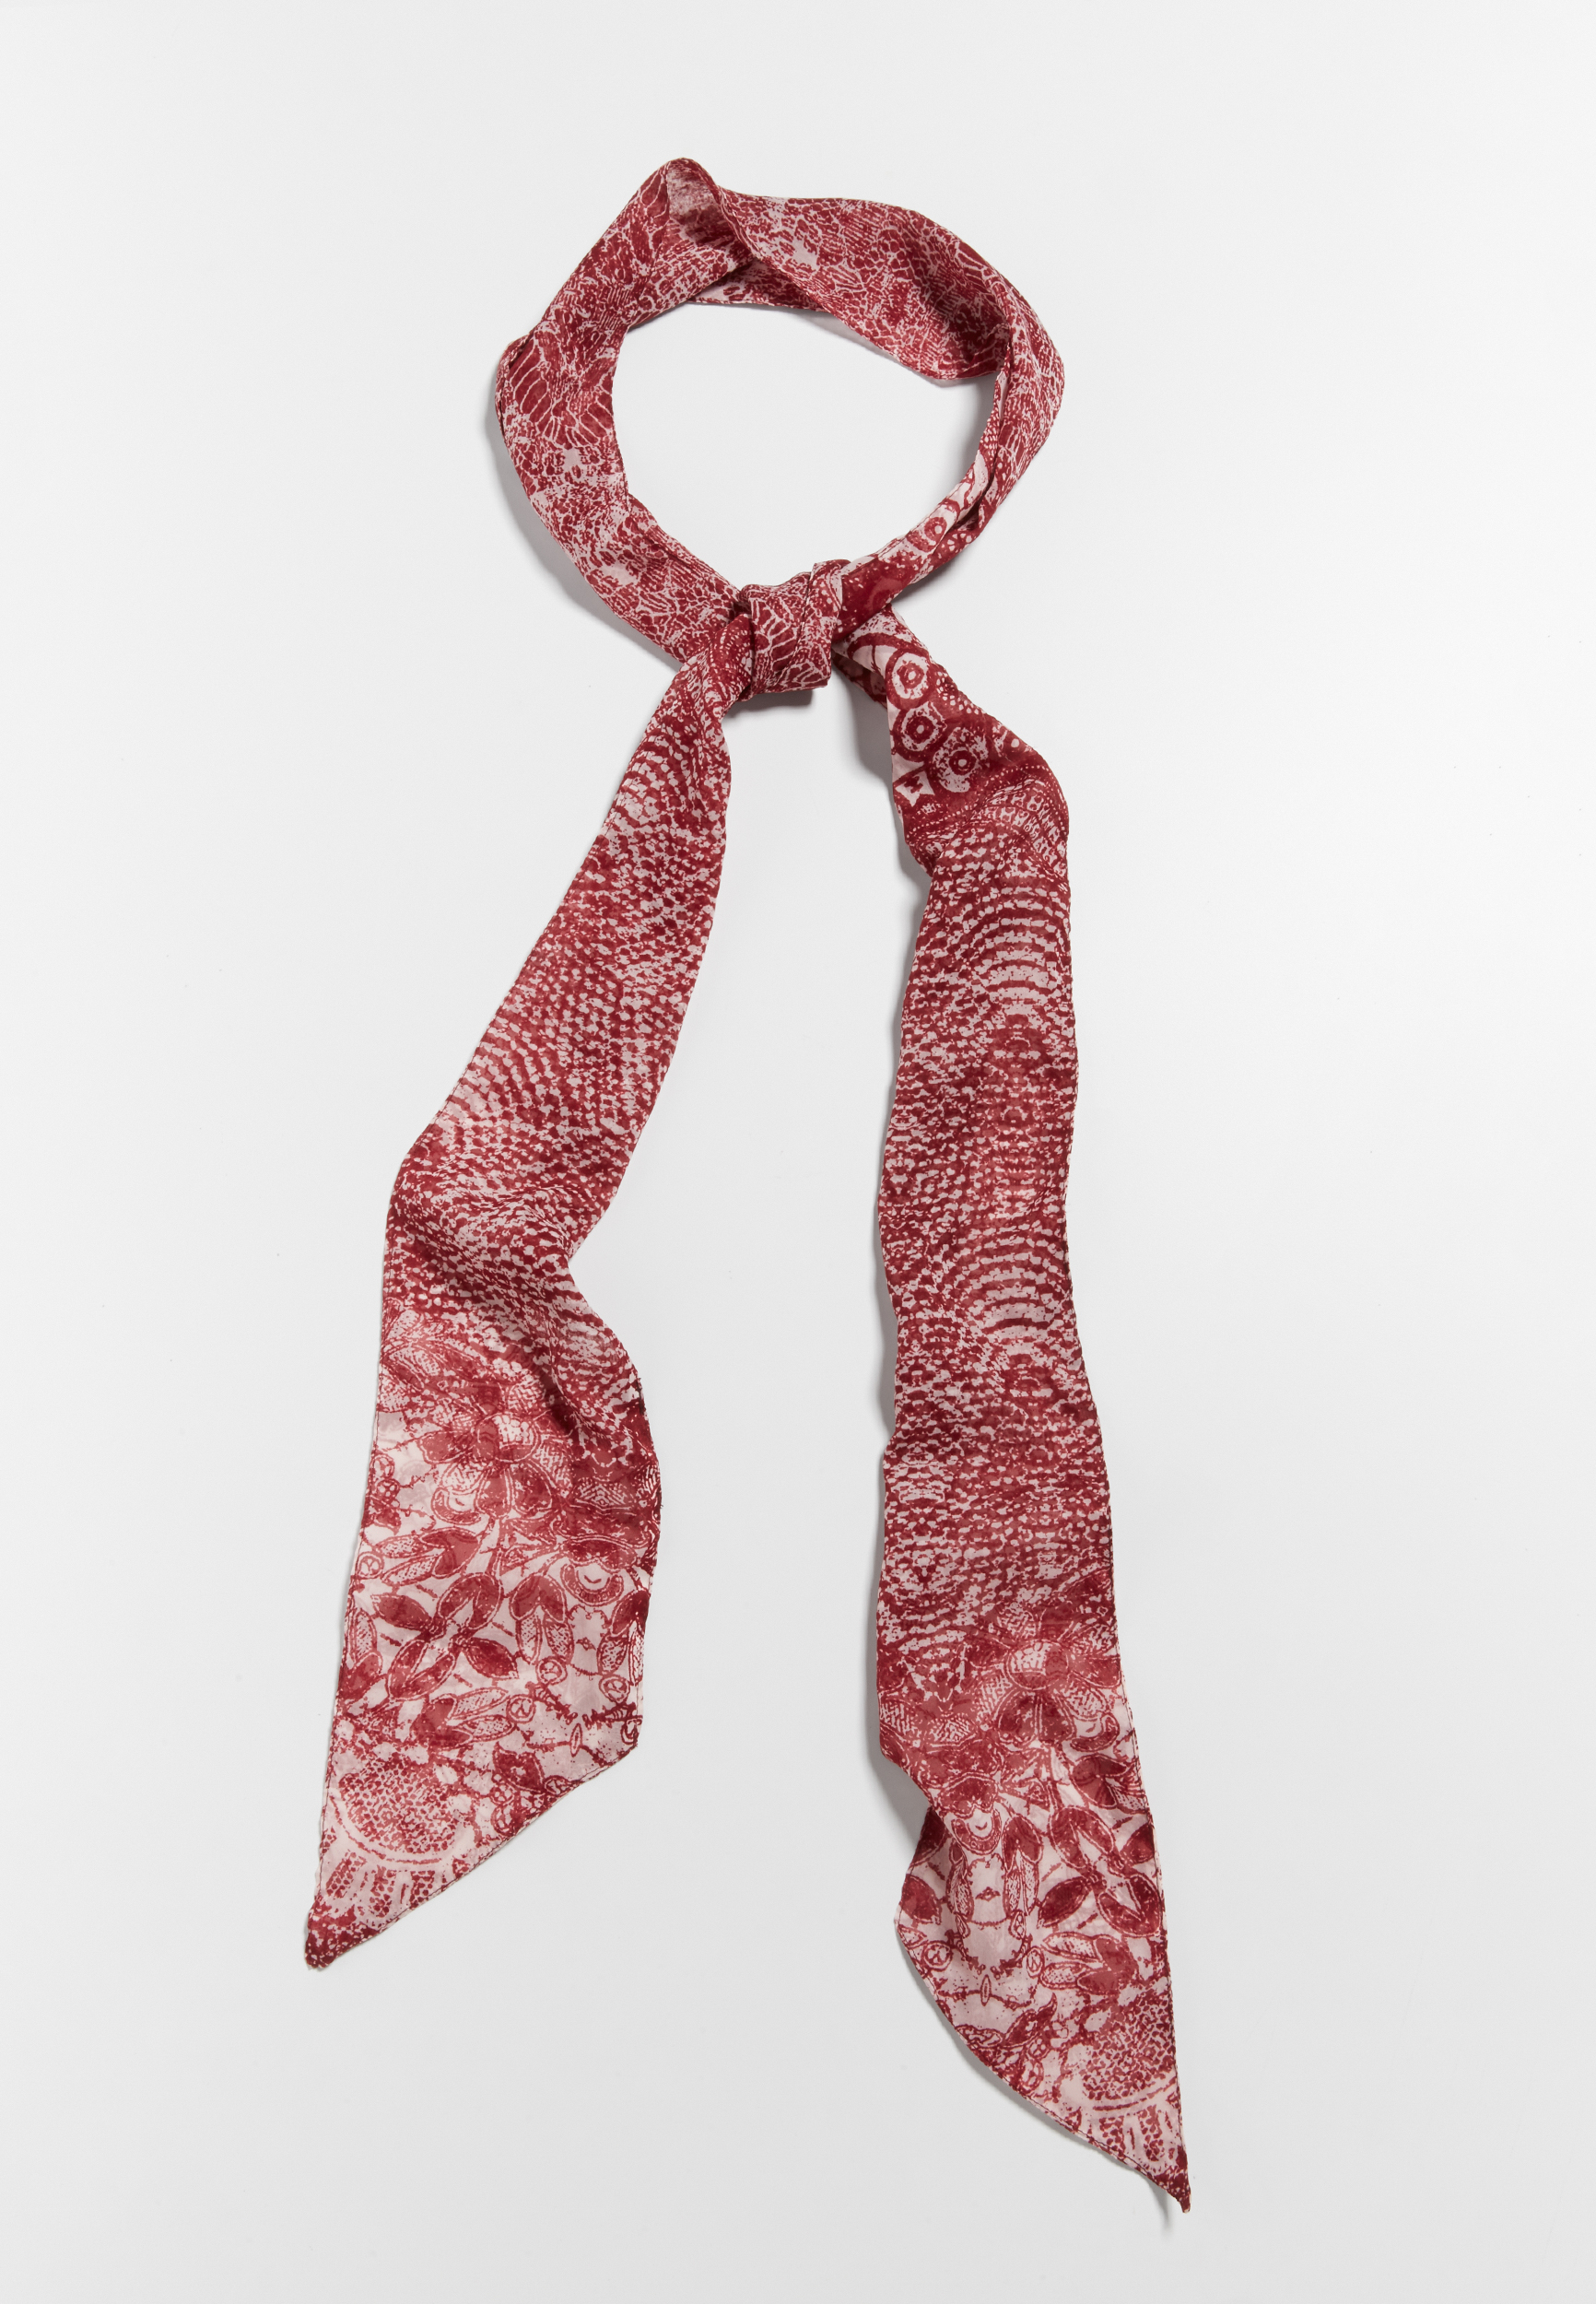 patterned chiffon skinny scarf in rose petal combo | maurices